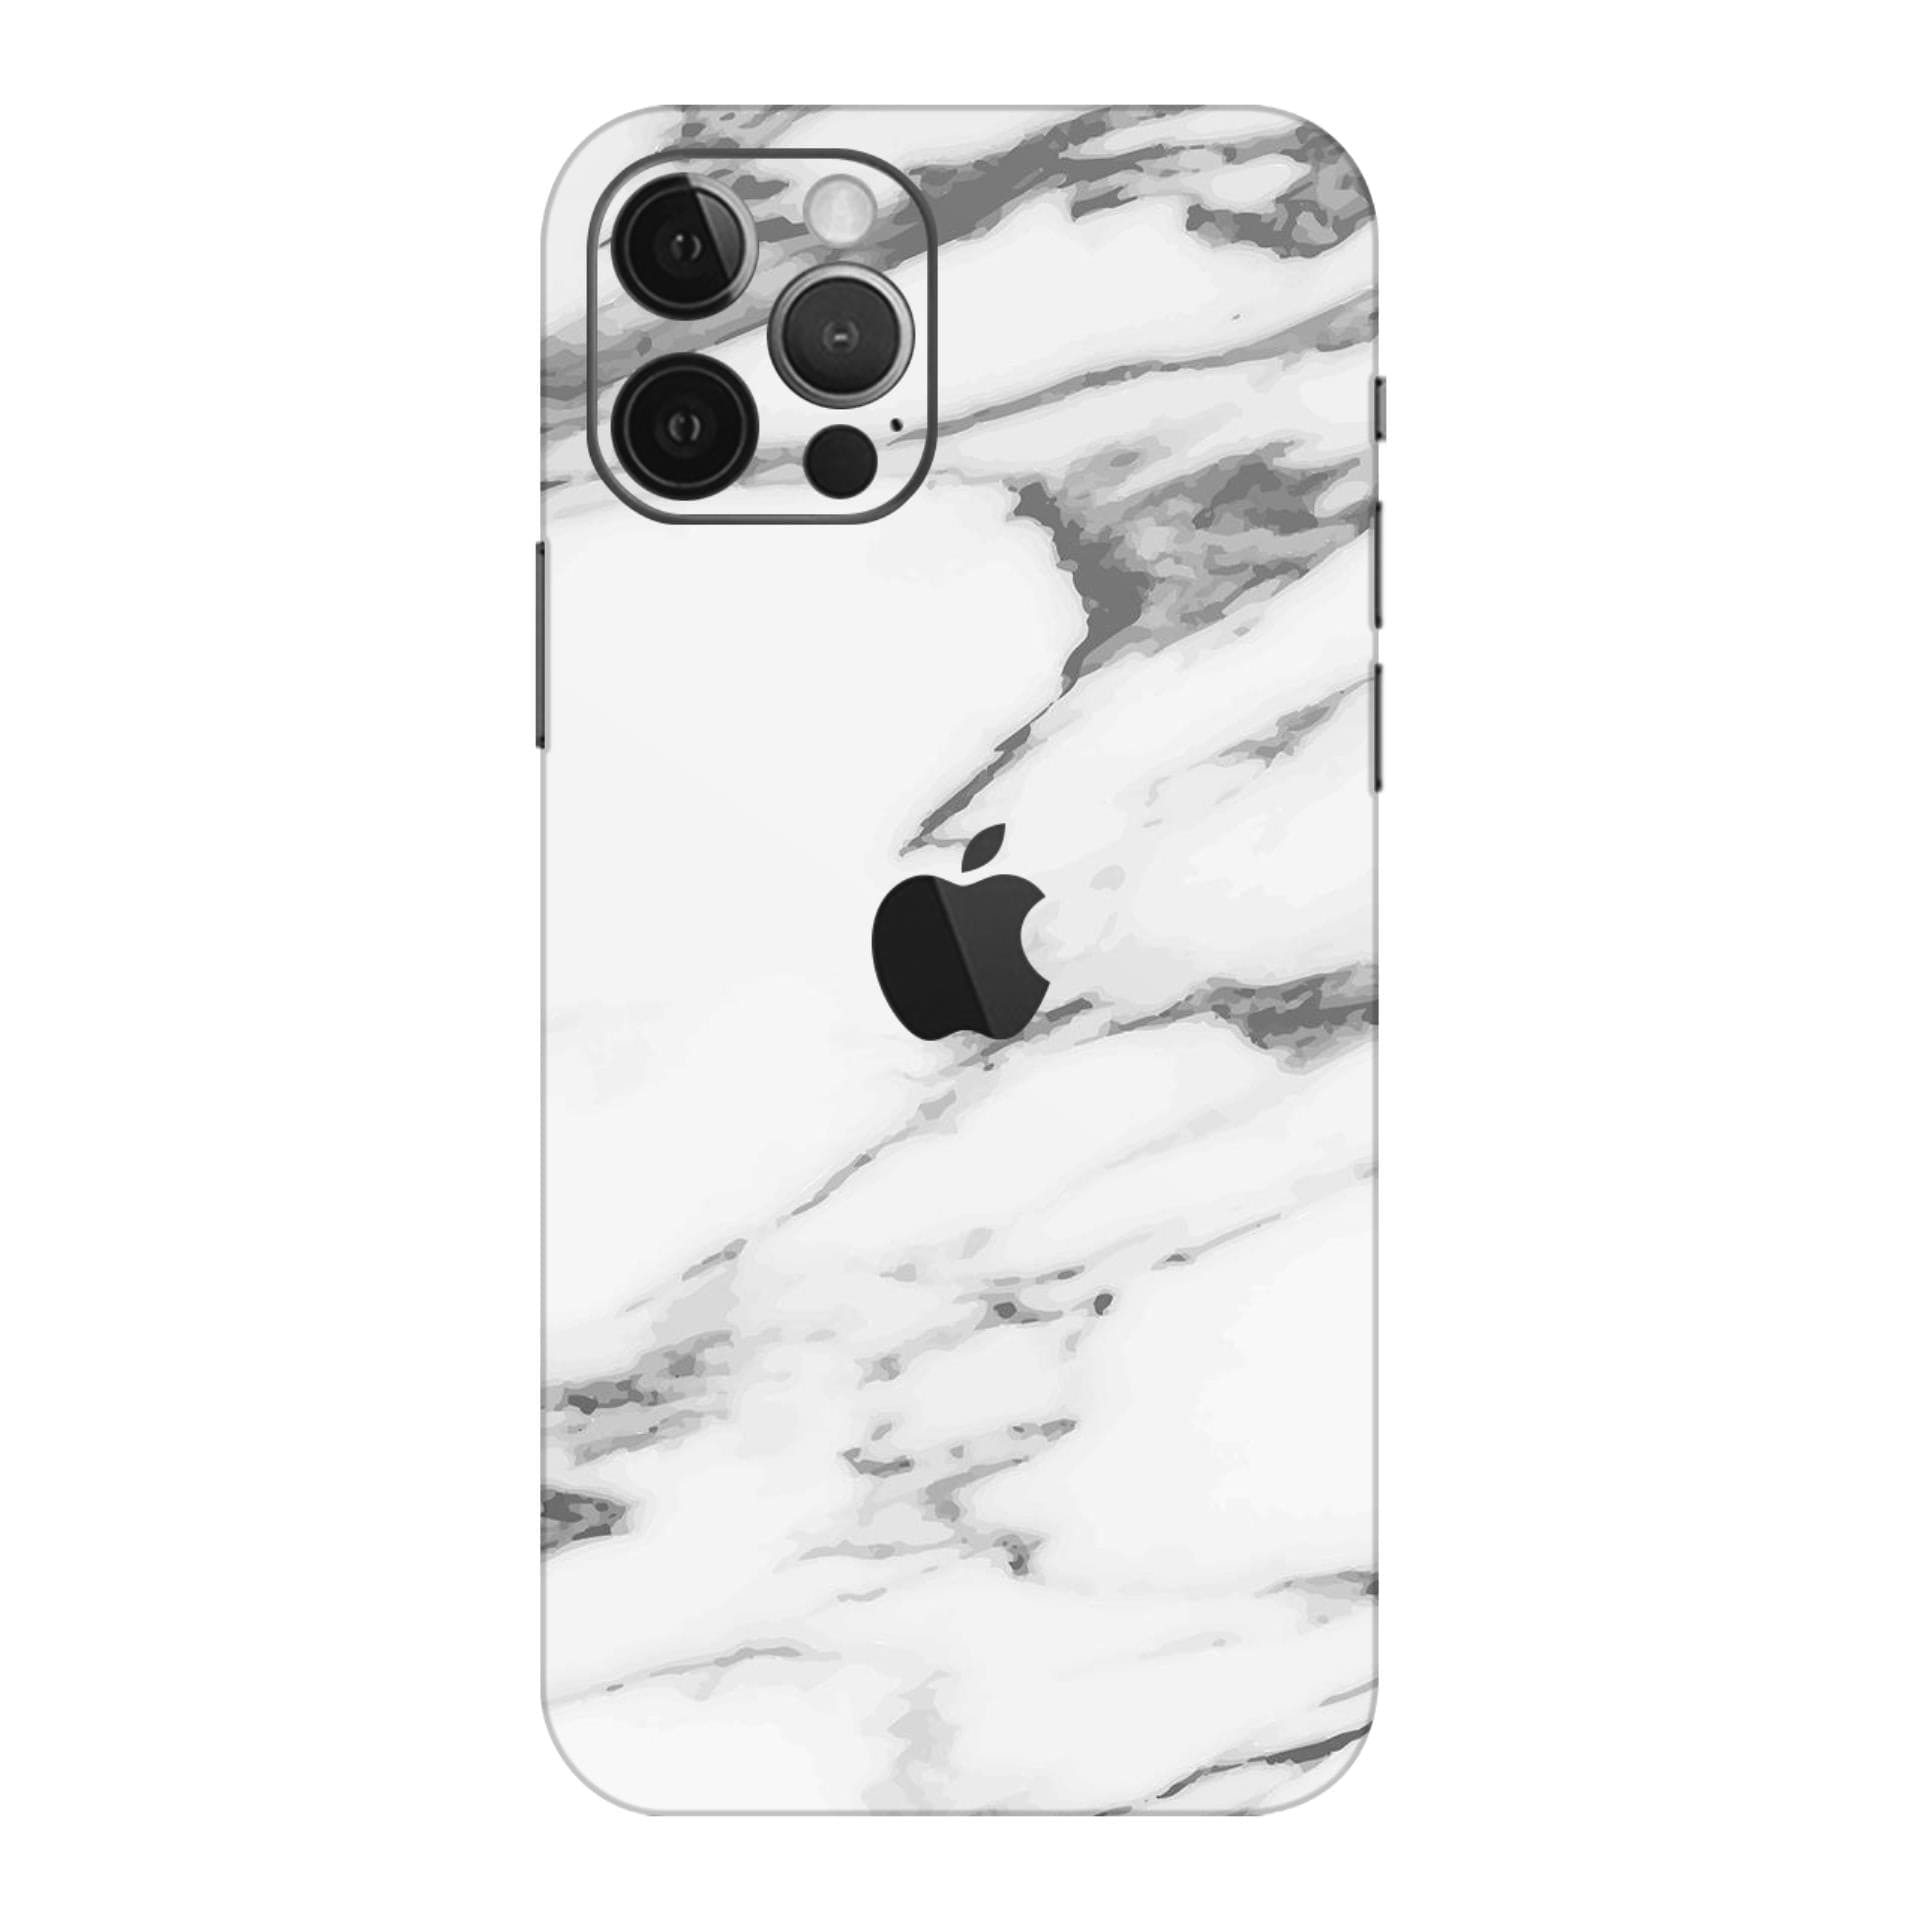 iphone 12 Pro Max White Marble skins